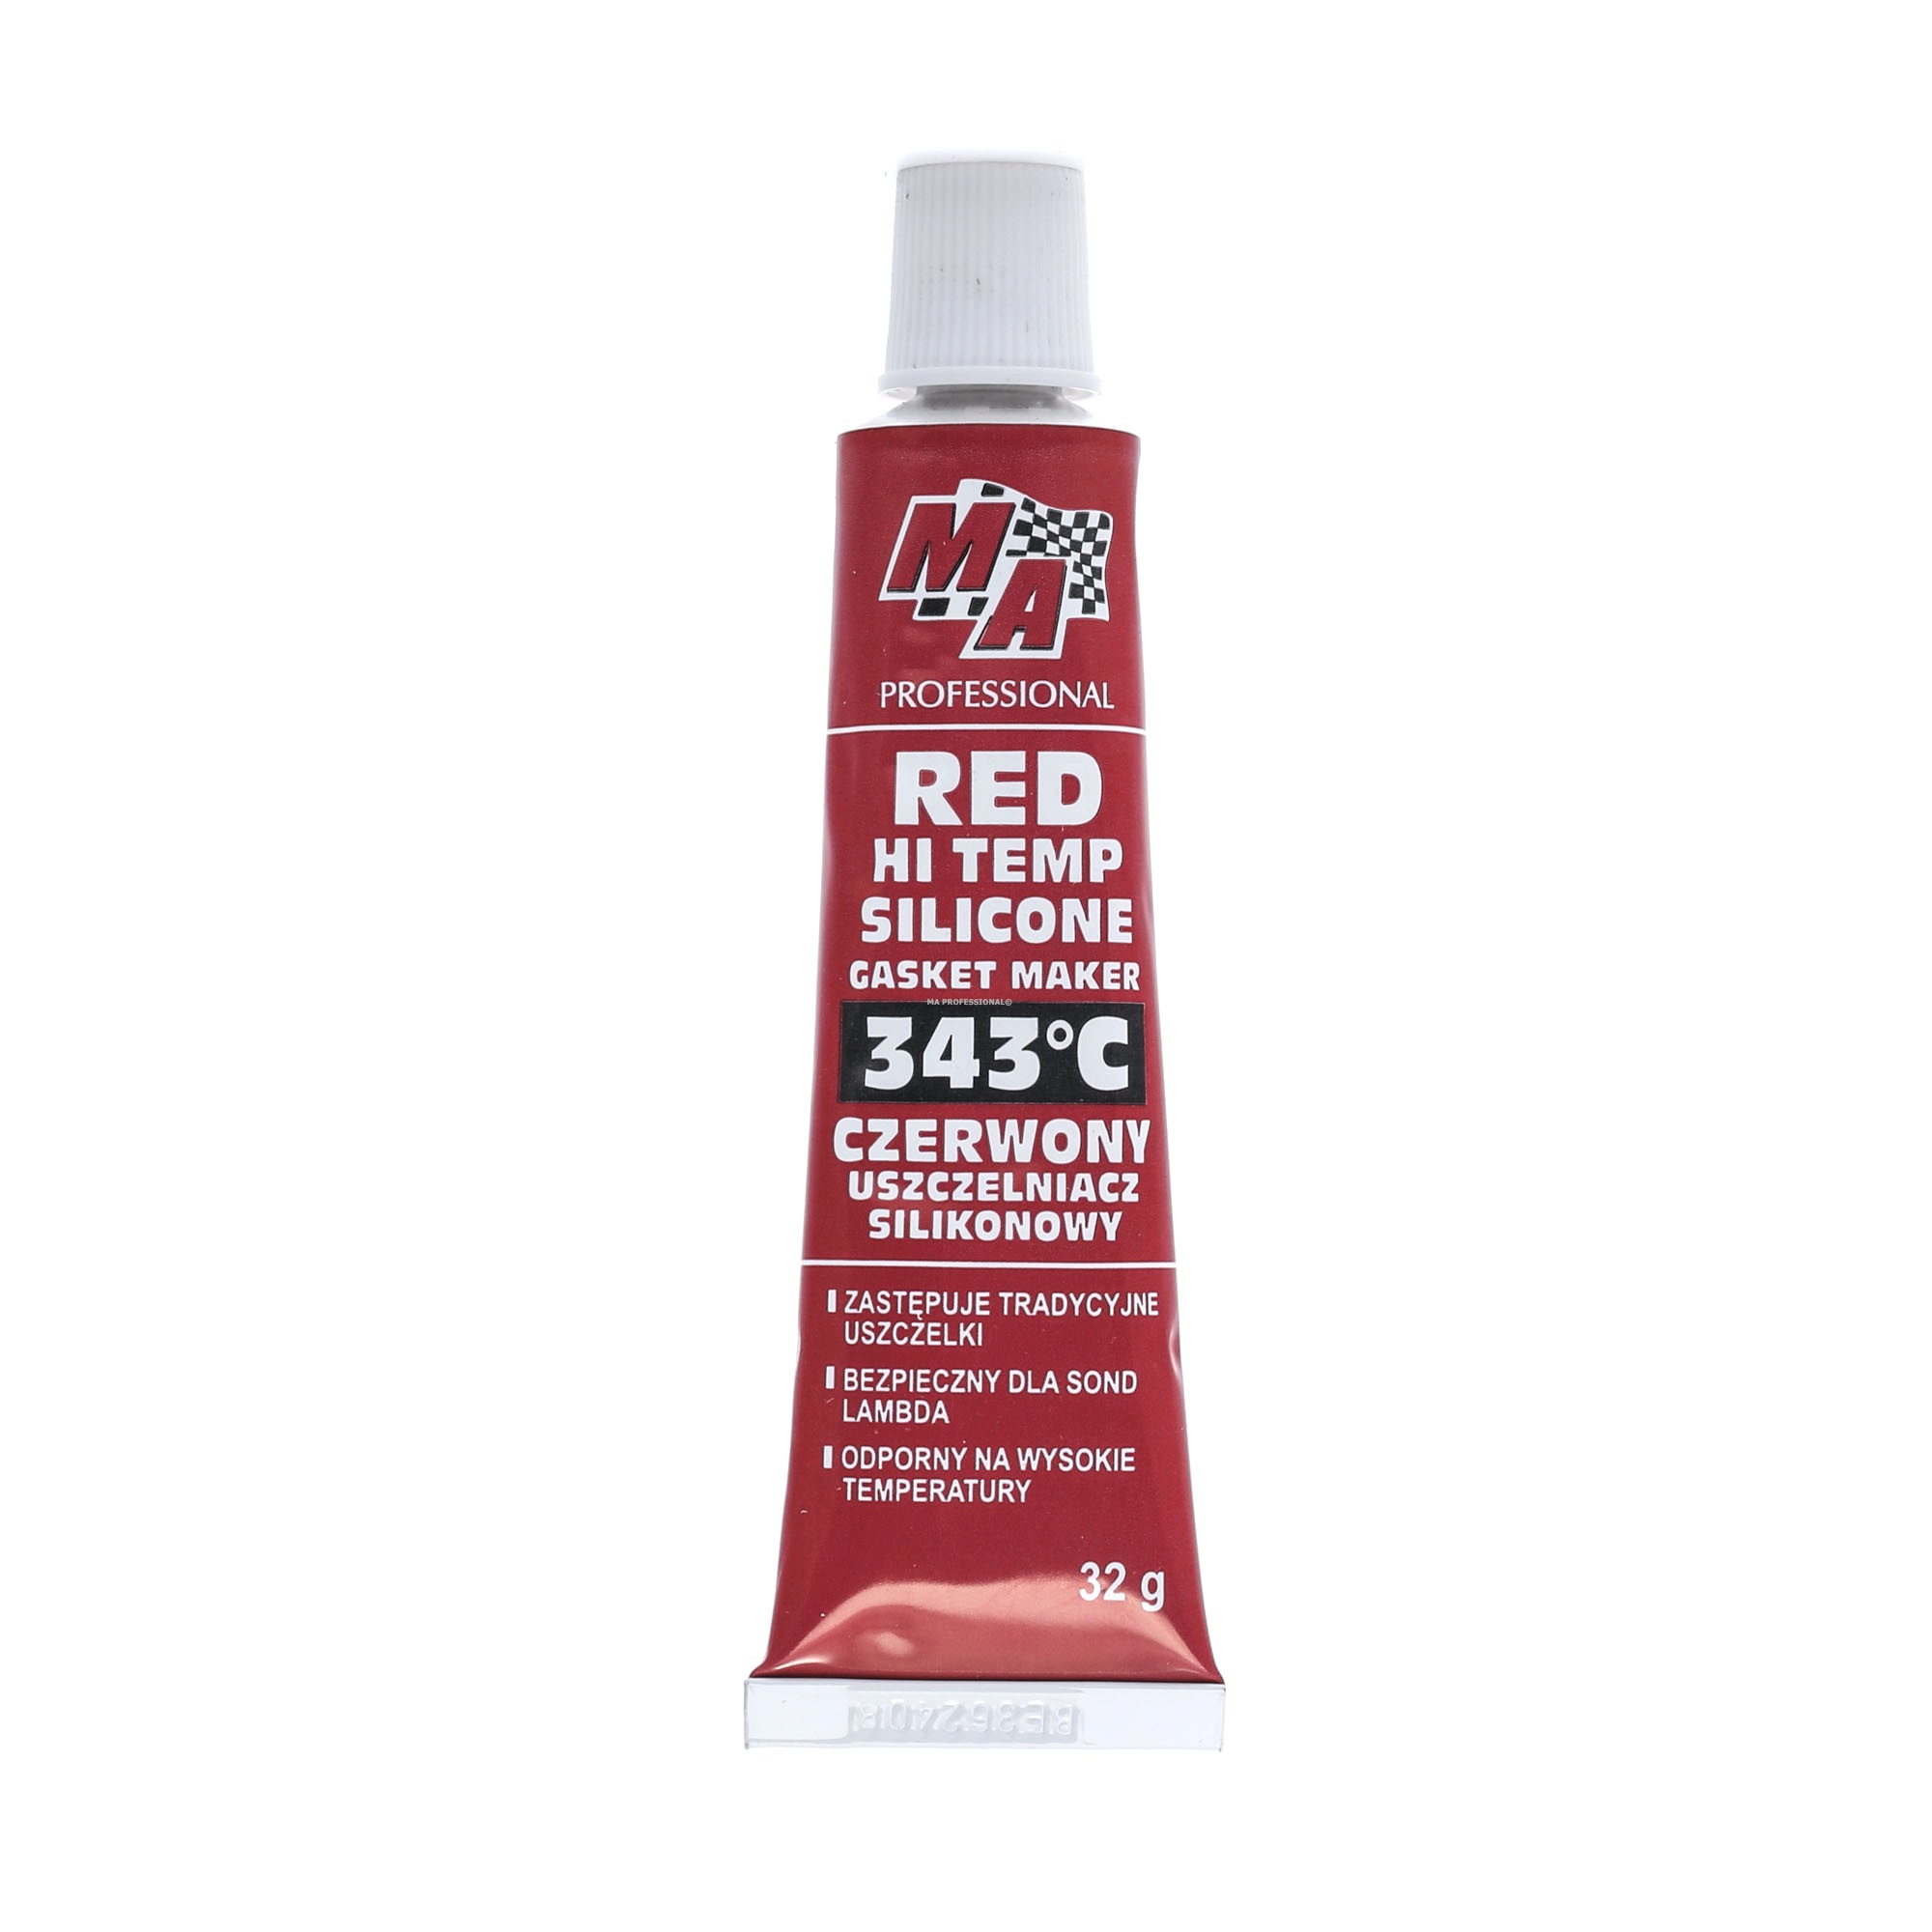 MA PROFESSIONAL 20A17 Body sealant cars Tube, Silicone, Capacity: 32ml, Permanently elastic, Oil resistant, red